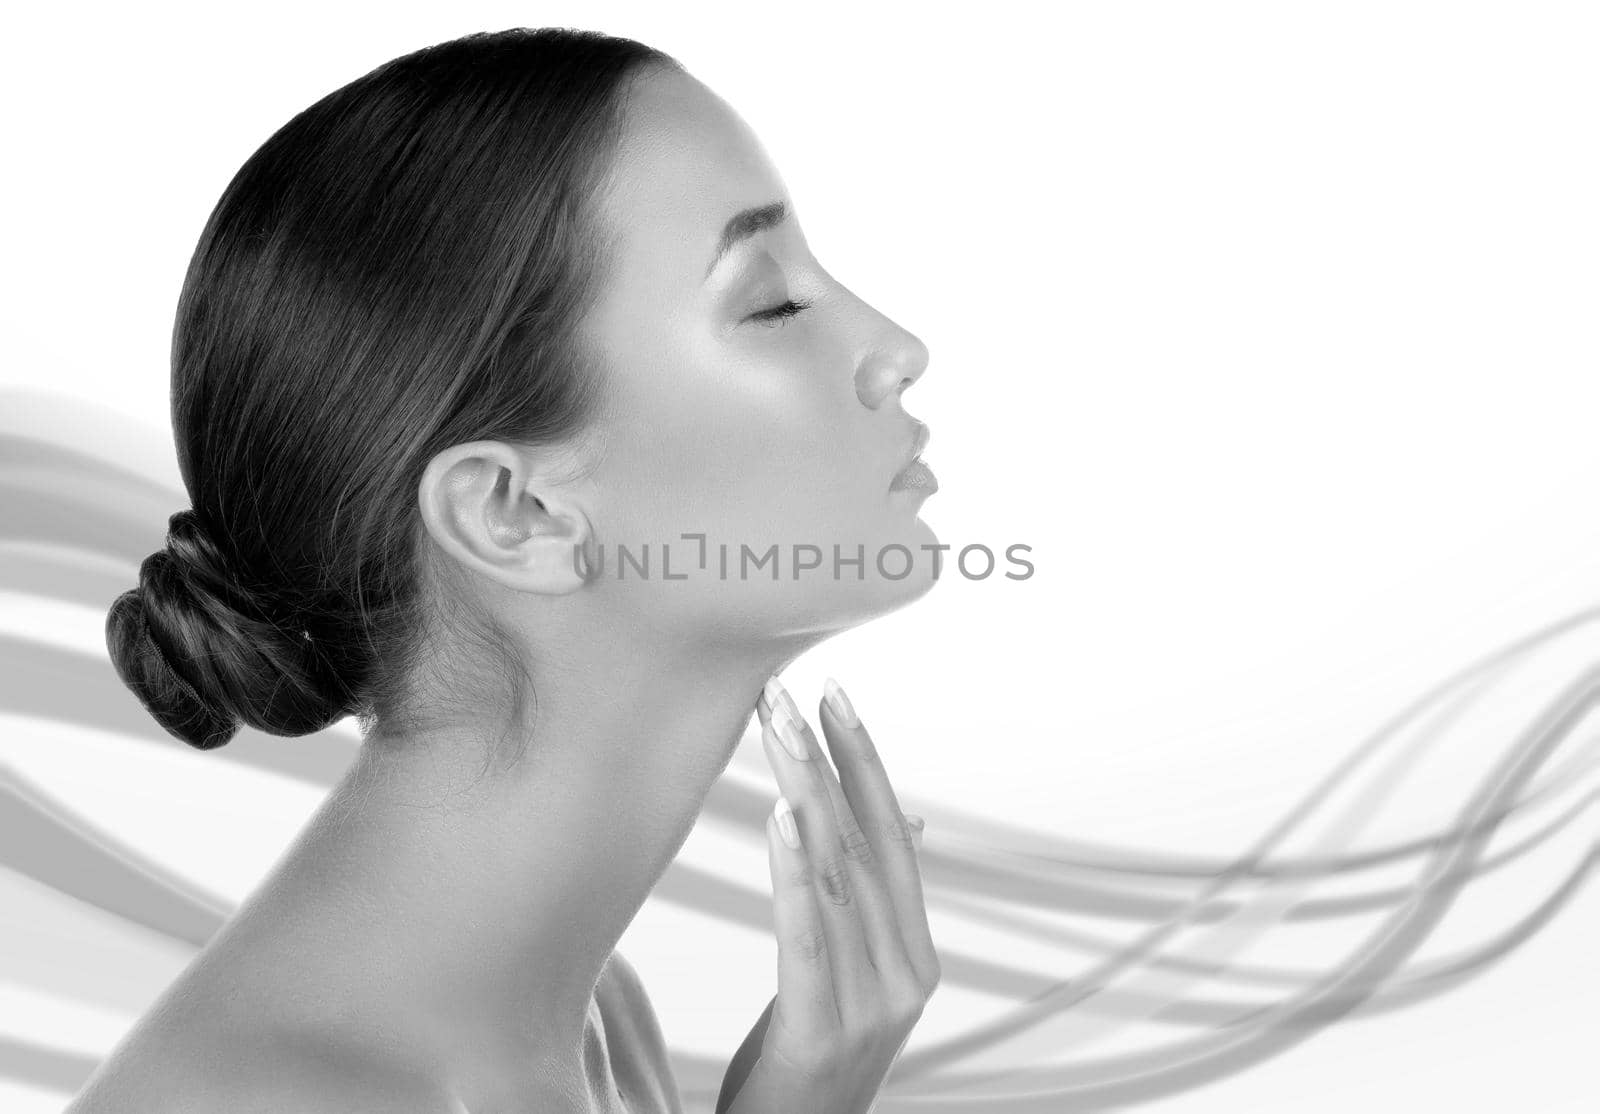 Pretty woman touching her neck against an abstract background